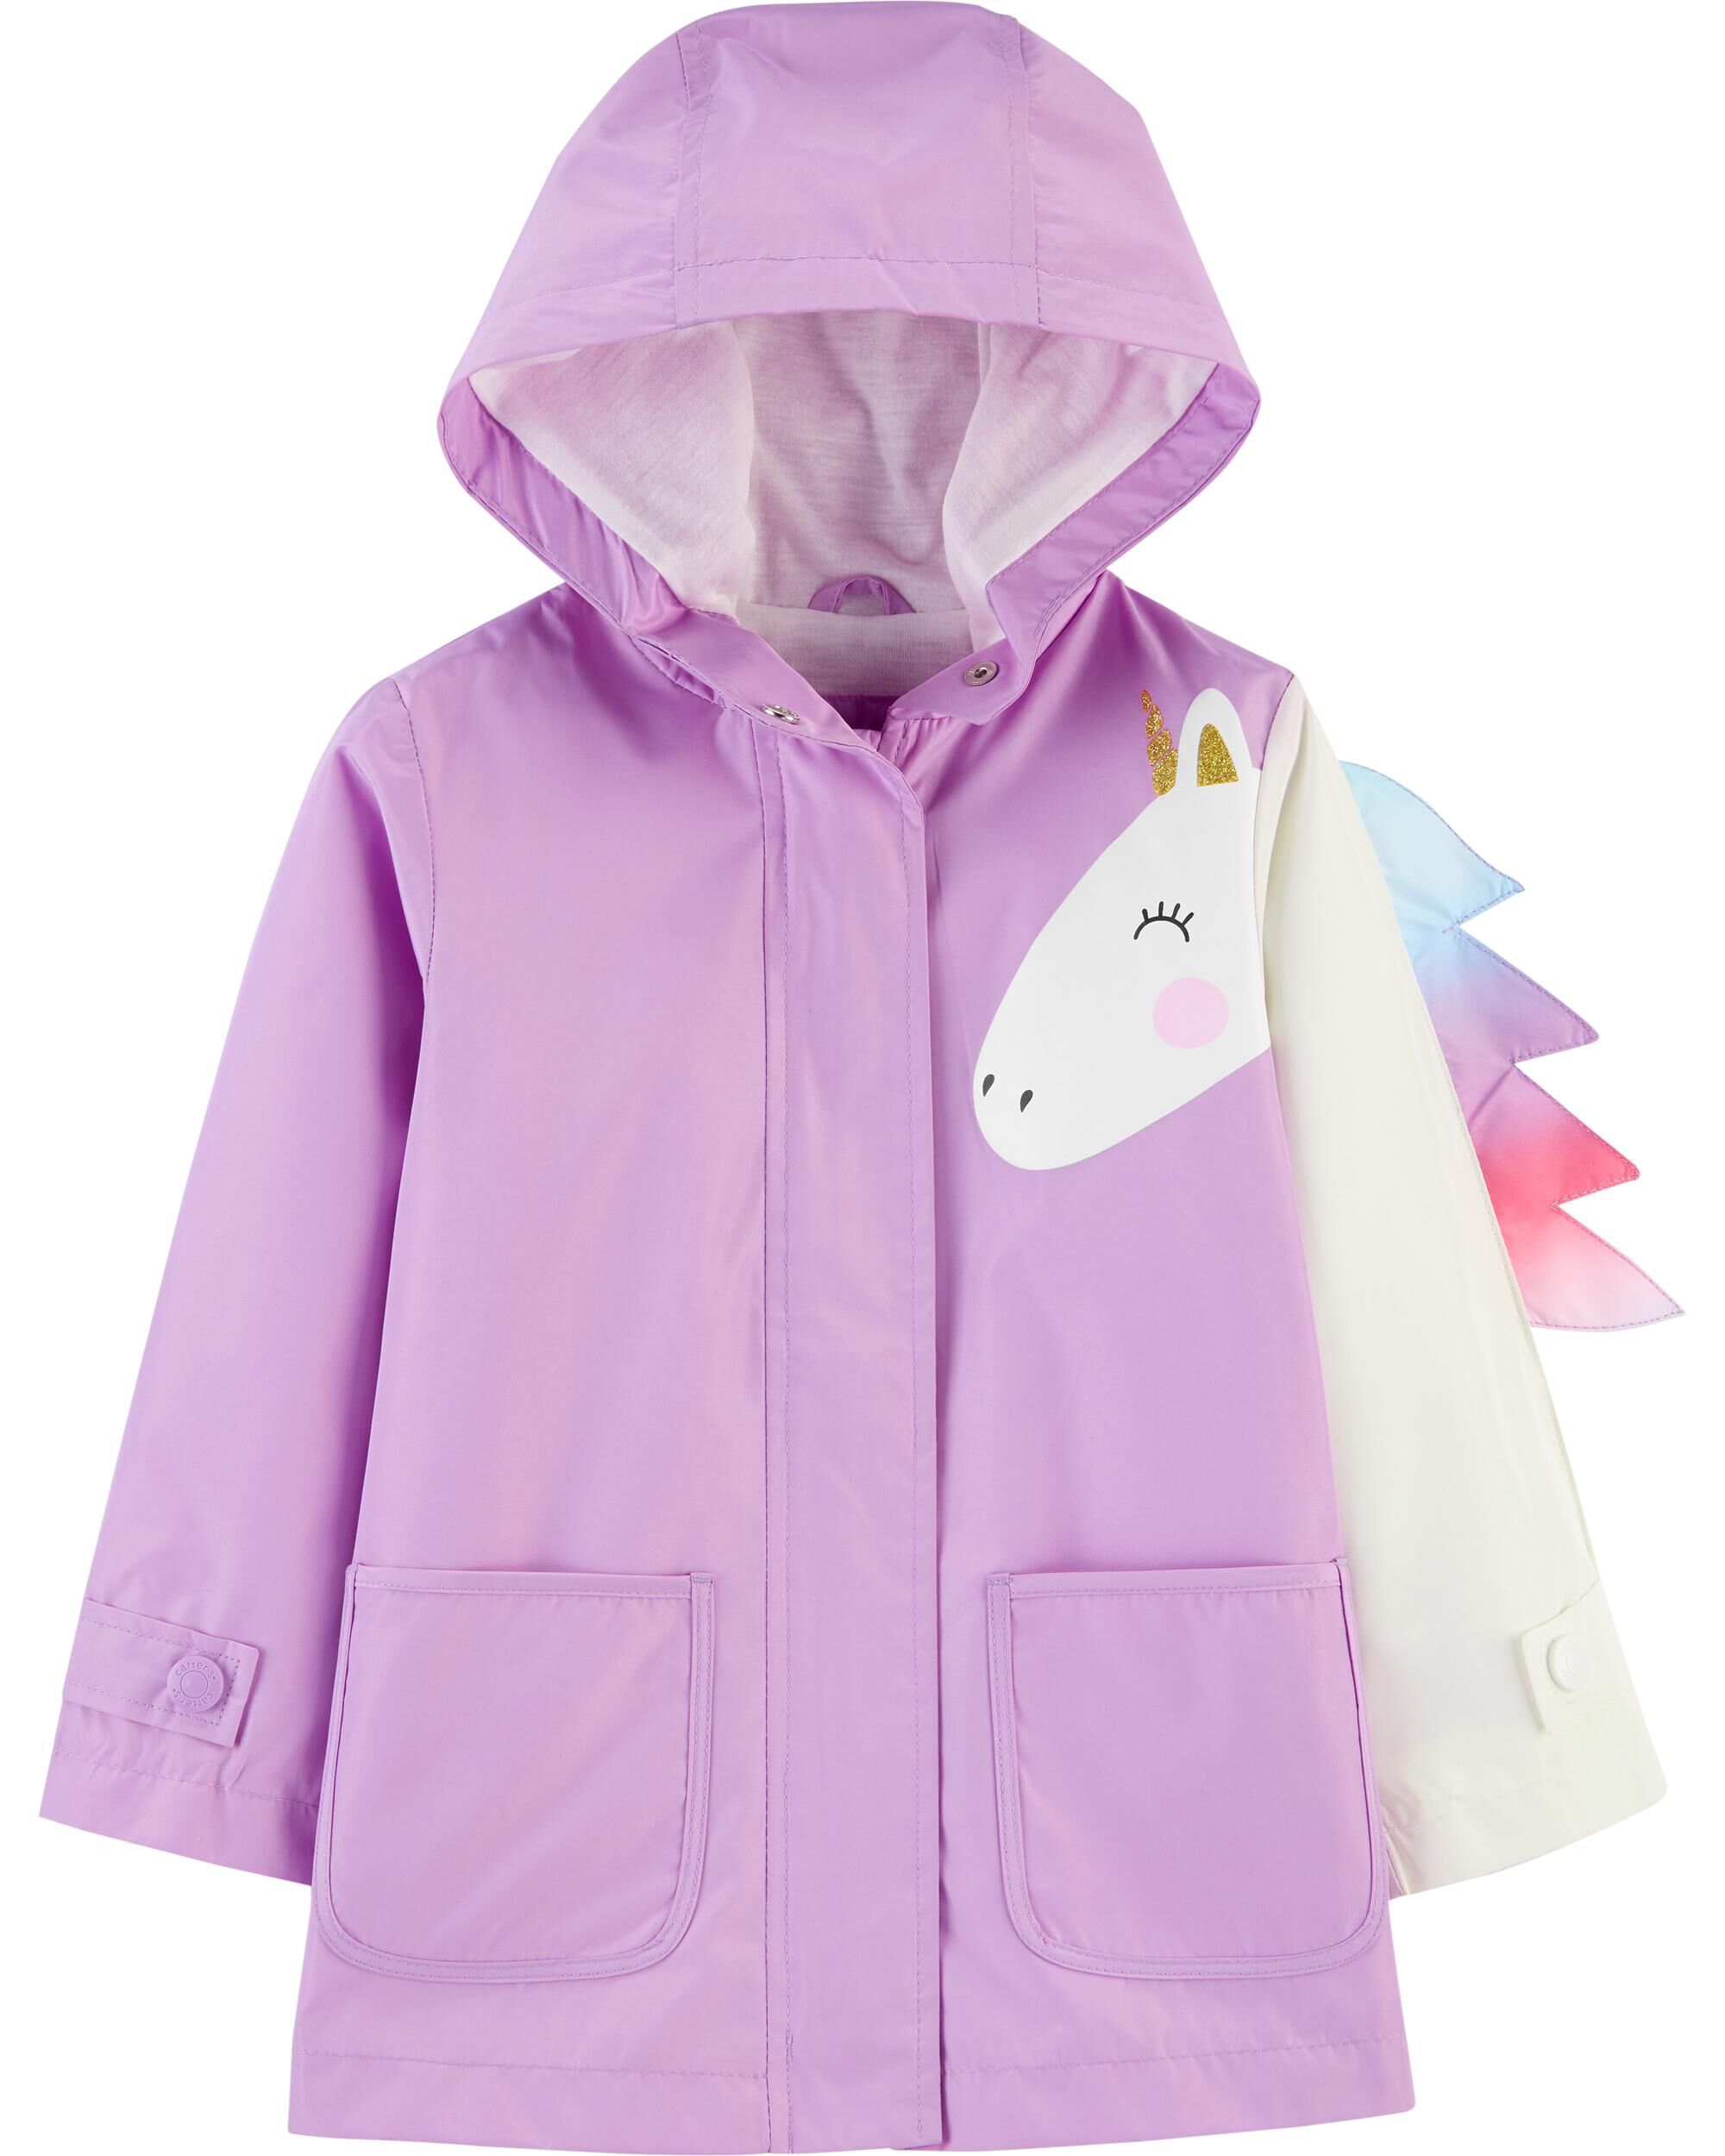 rain jacket for 1 year old